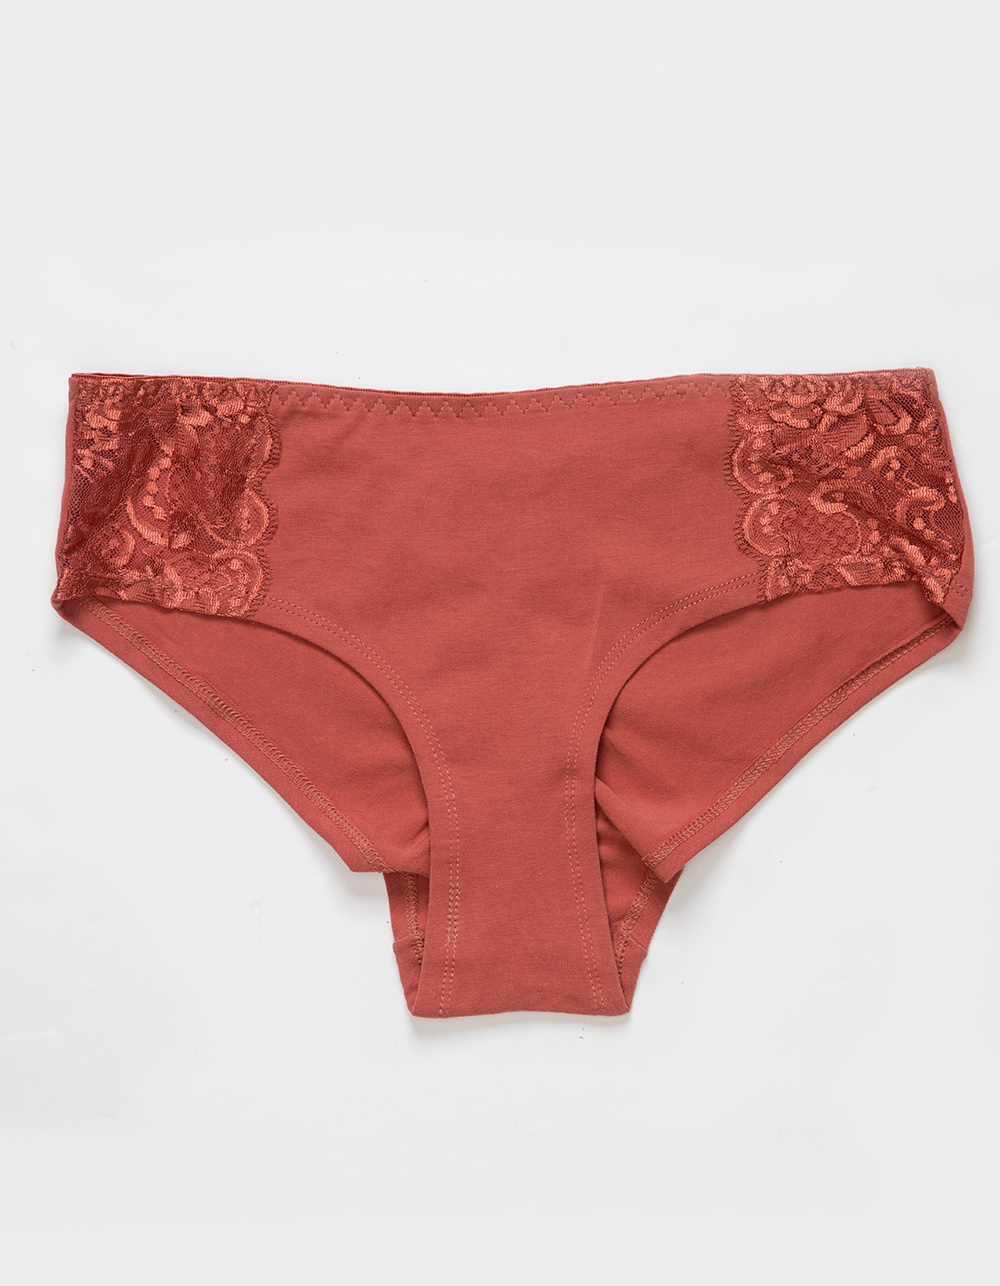 LOVE LIBBY Lace Sides Cheeky Panties - RUST